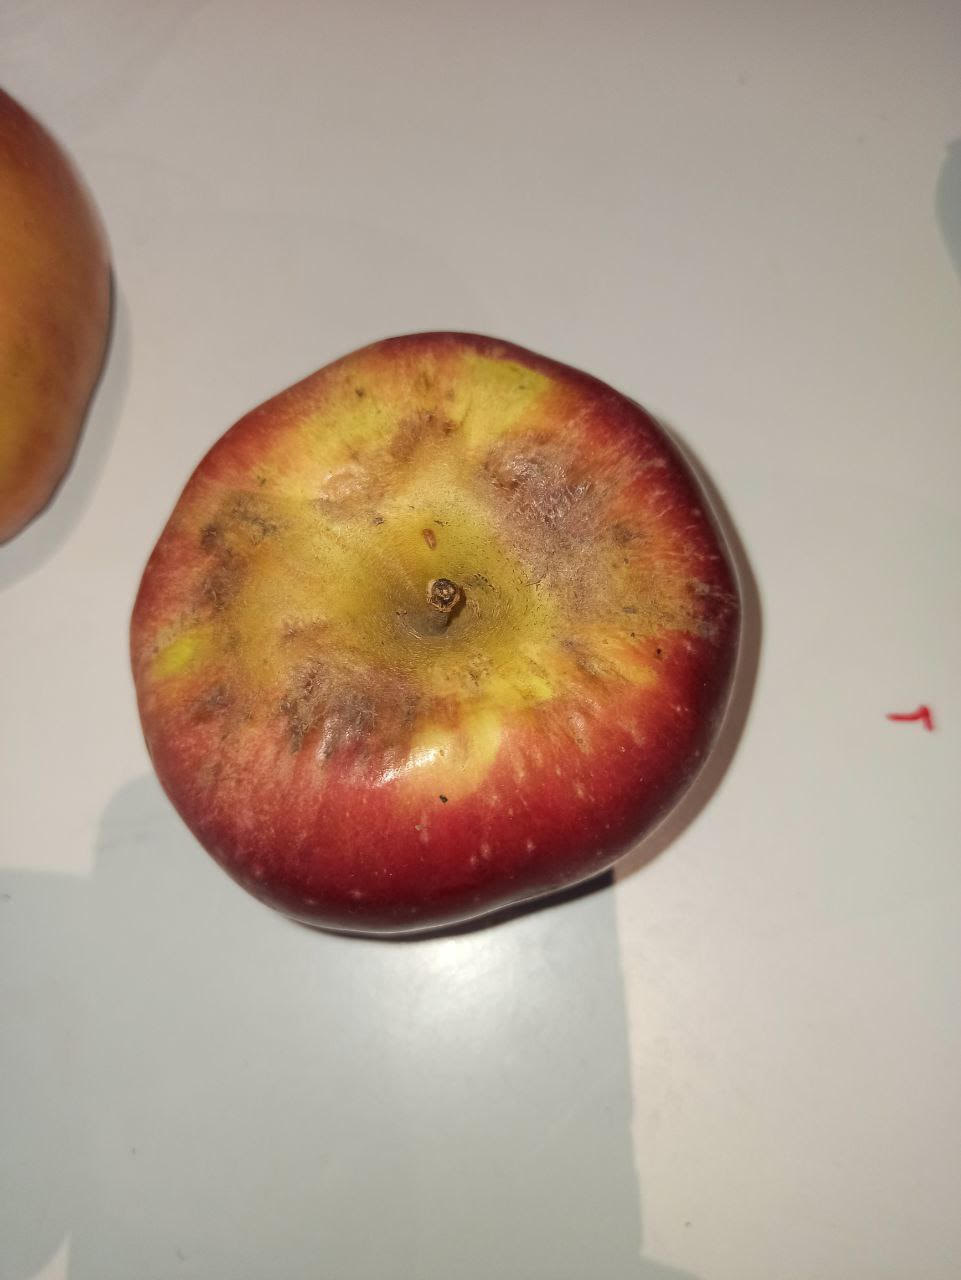 A rotten apple on a table

Description automatically generated